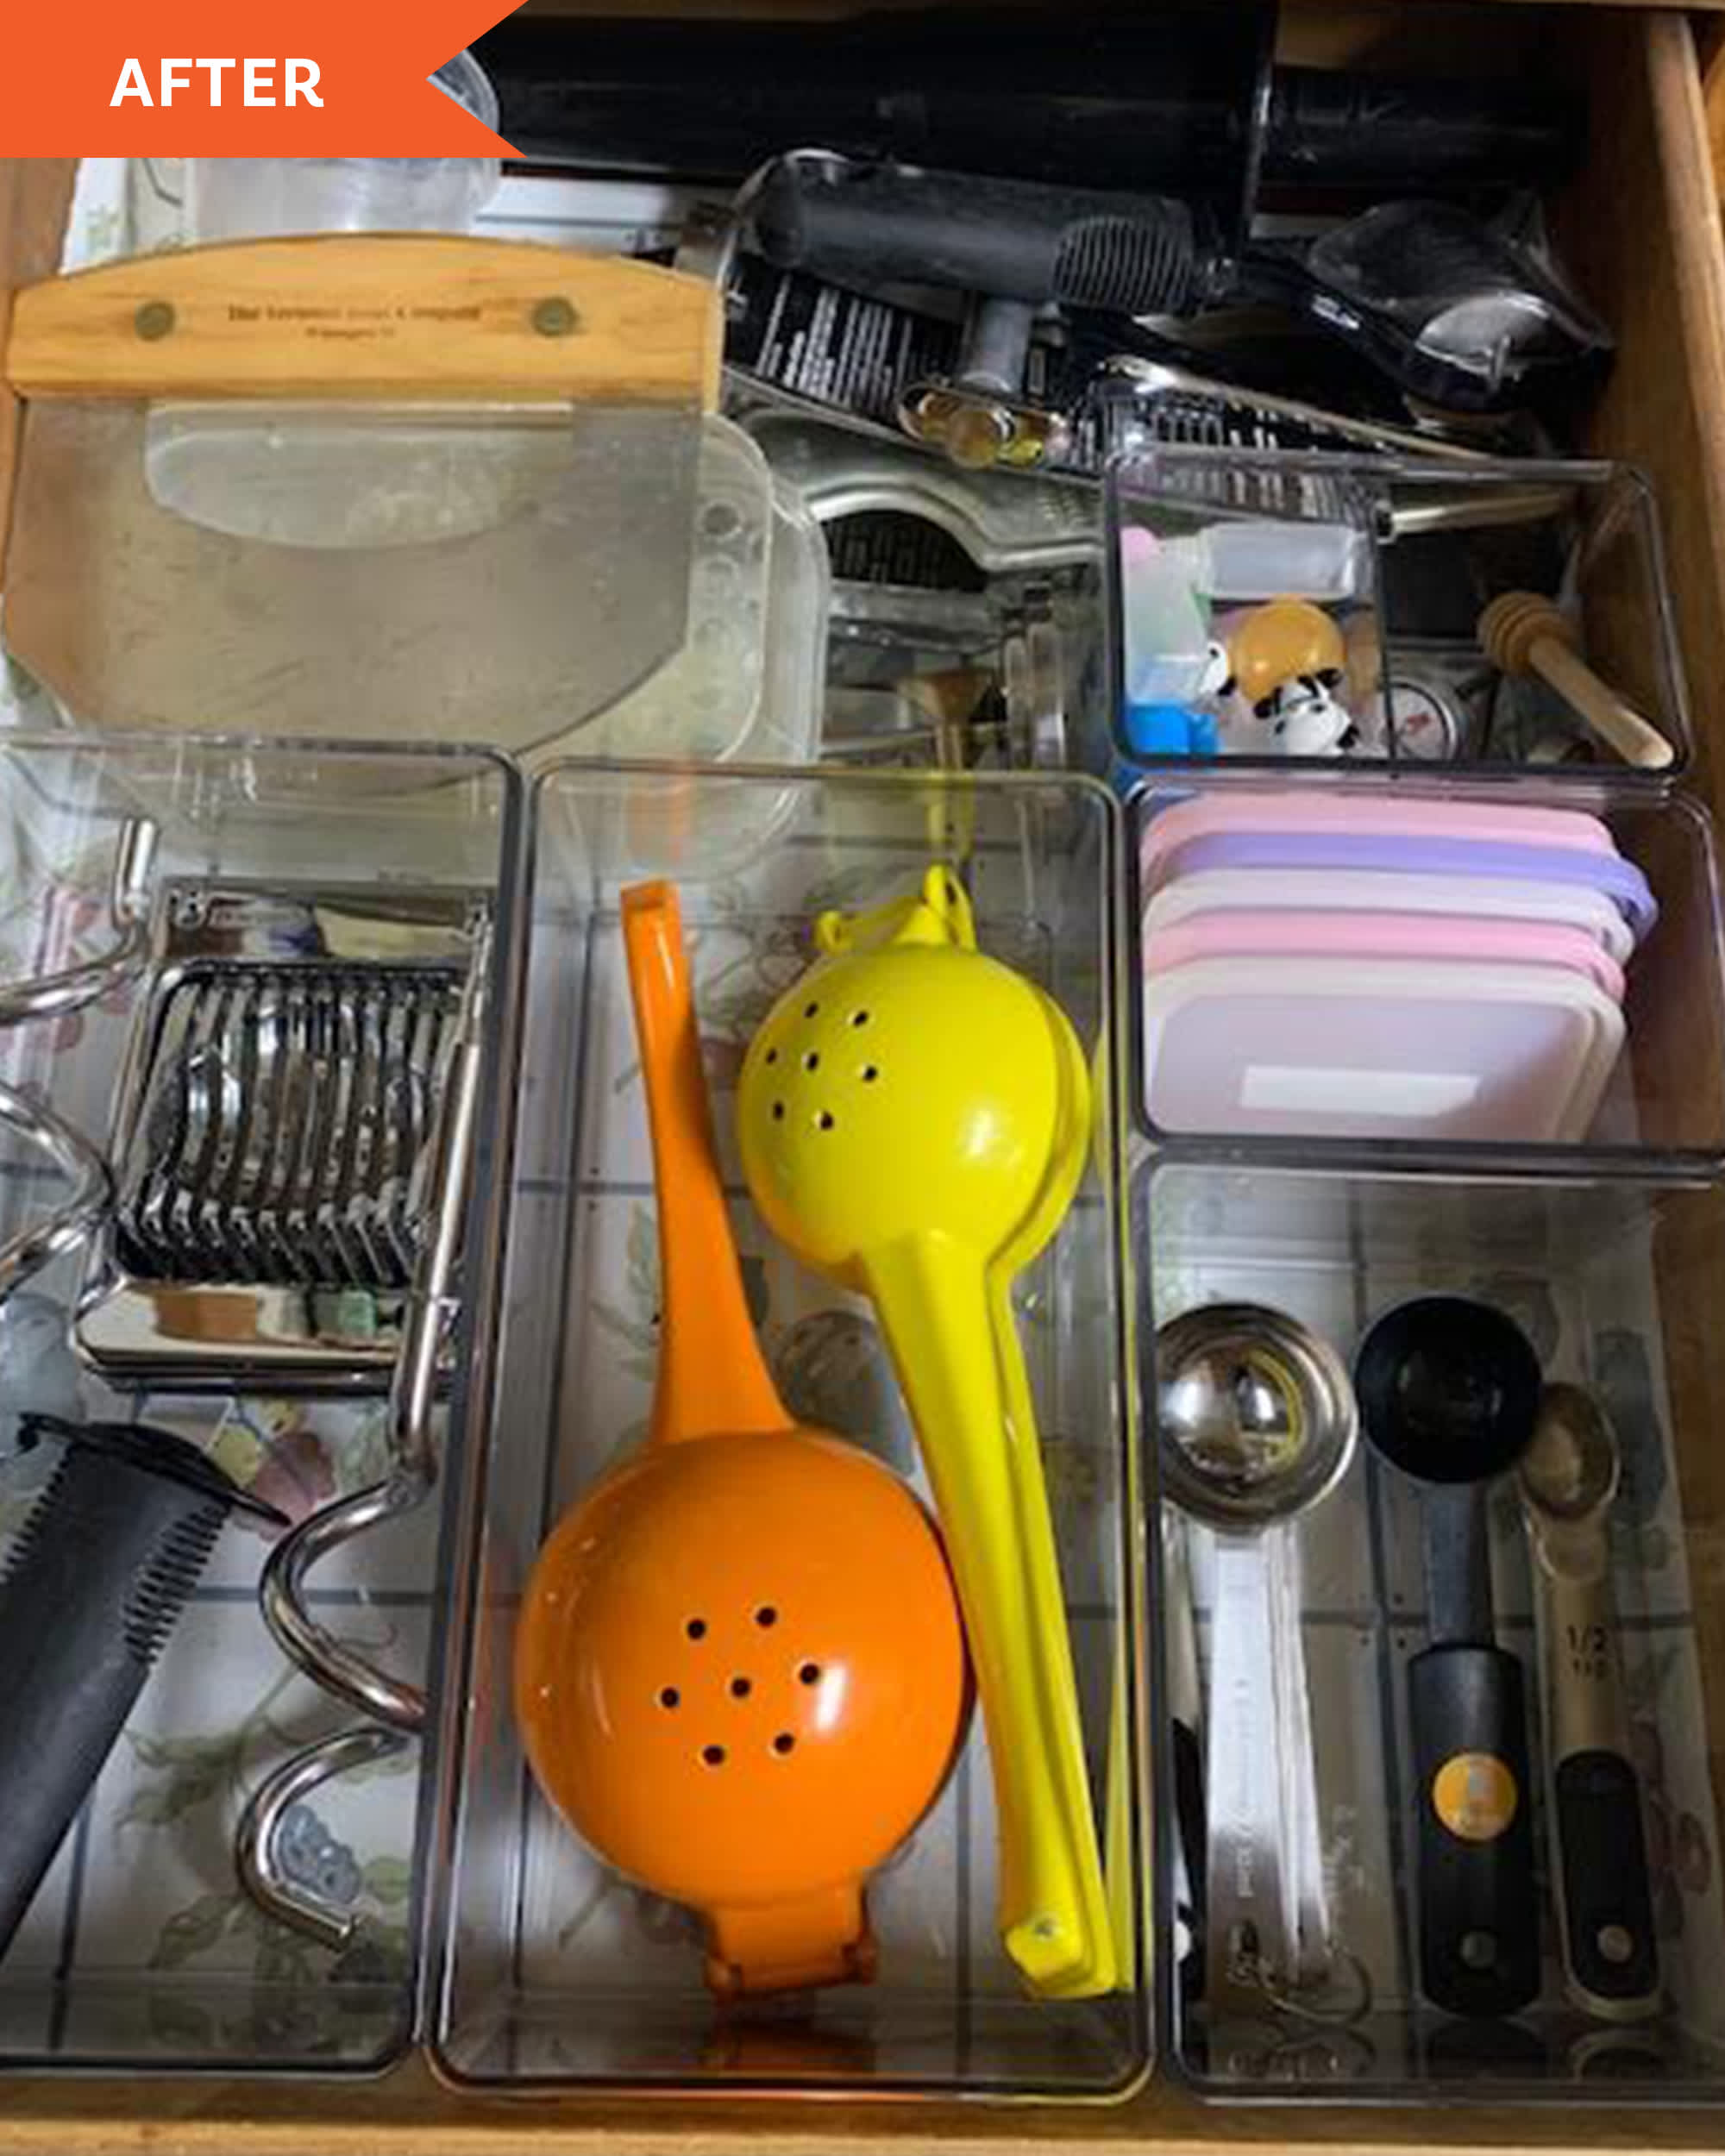 These Kitchen Utensil Sets Take Your Tool Drawer From Mess to Success